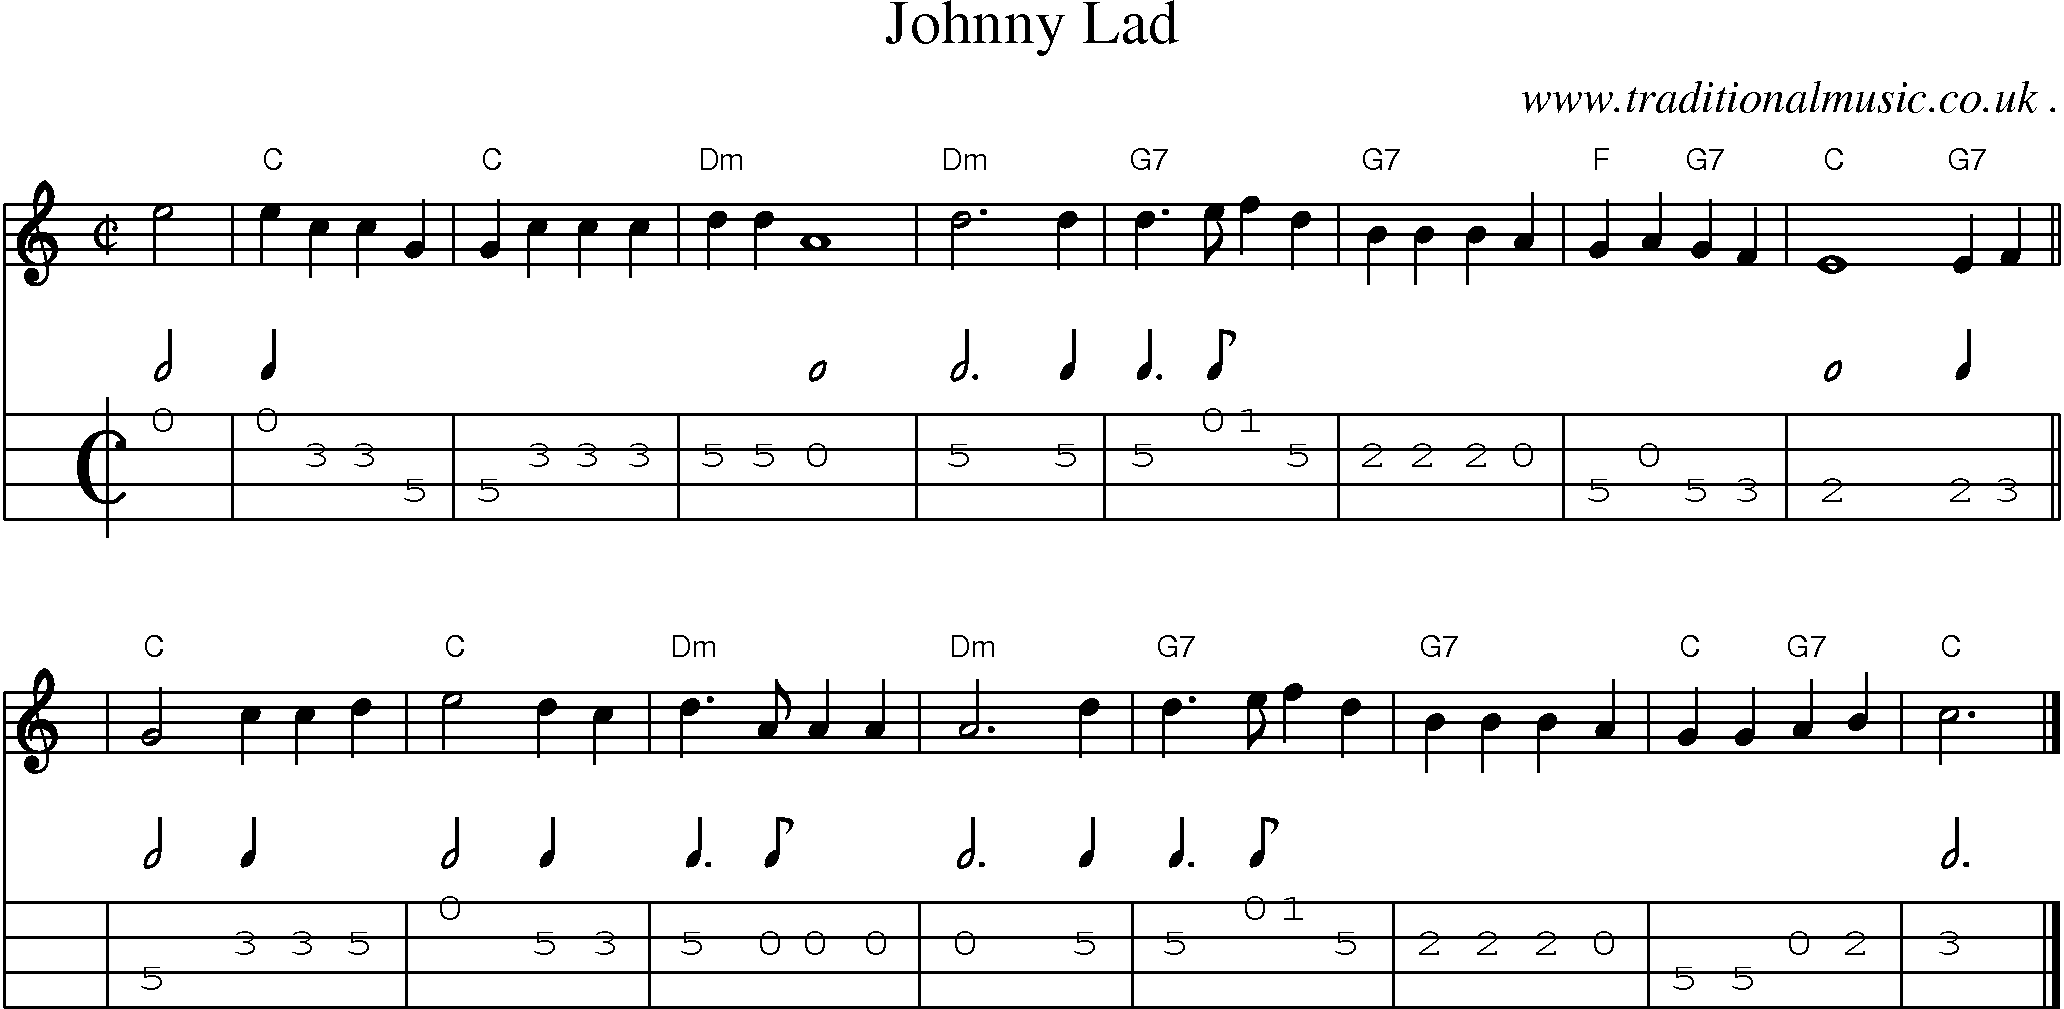 Sheet-music  score, Chords and Mandolin Tabs for Johnny Lad